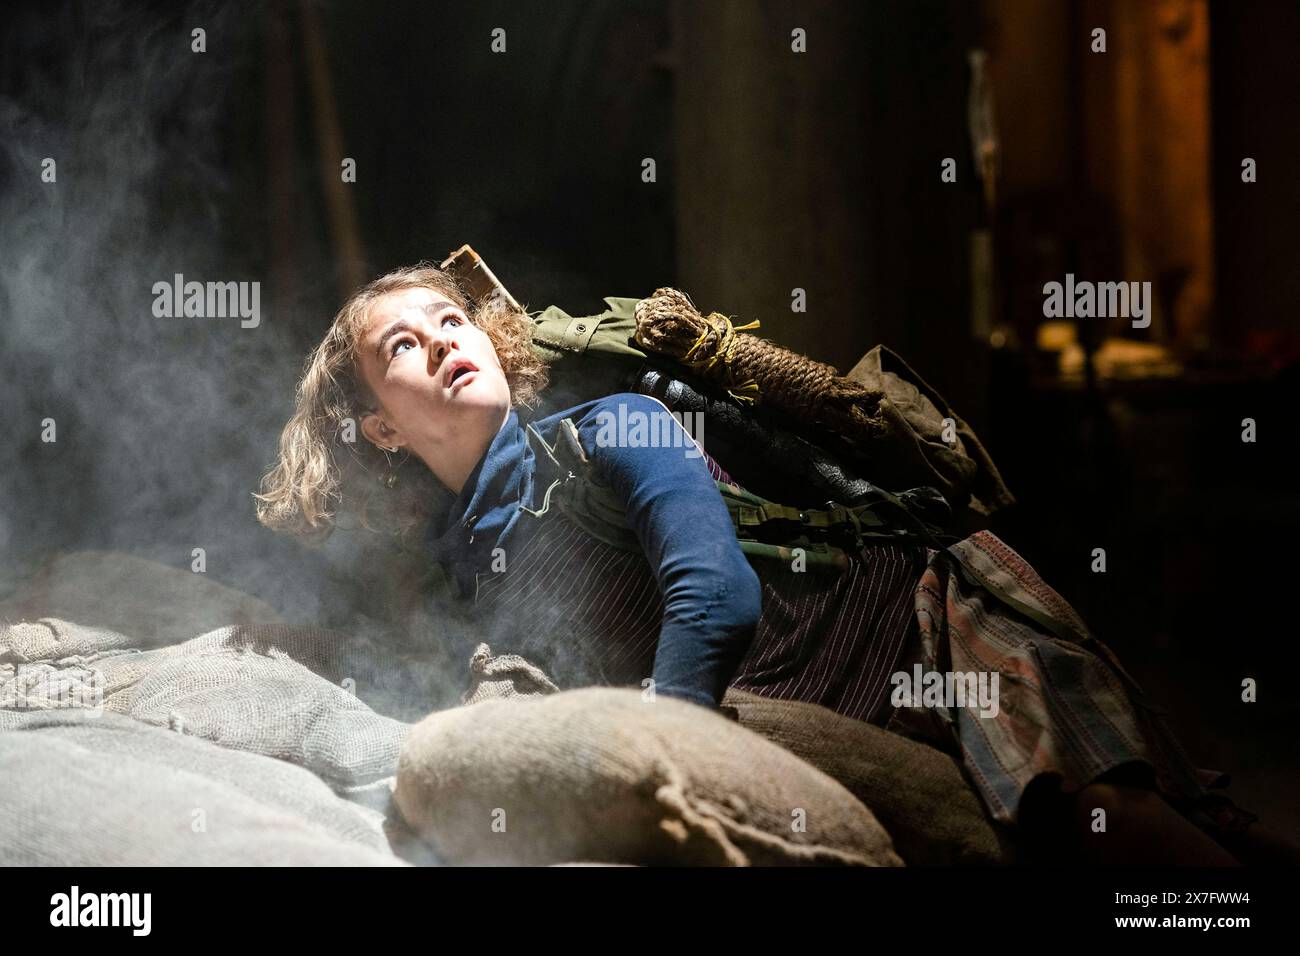 A Quiet Place: Part II (2020) directed by John Krasinski and starring Millicent Simmonds as Regan Abbott. Sequel following the Abbott family's journey and the discovery of new dangers. Publicity photograph ***EDITORIAL USE ONLY***. Credit: BFA / Jonny Cournoyer / Paramount Pictures Stock Photo